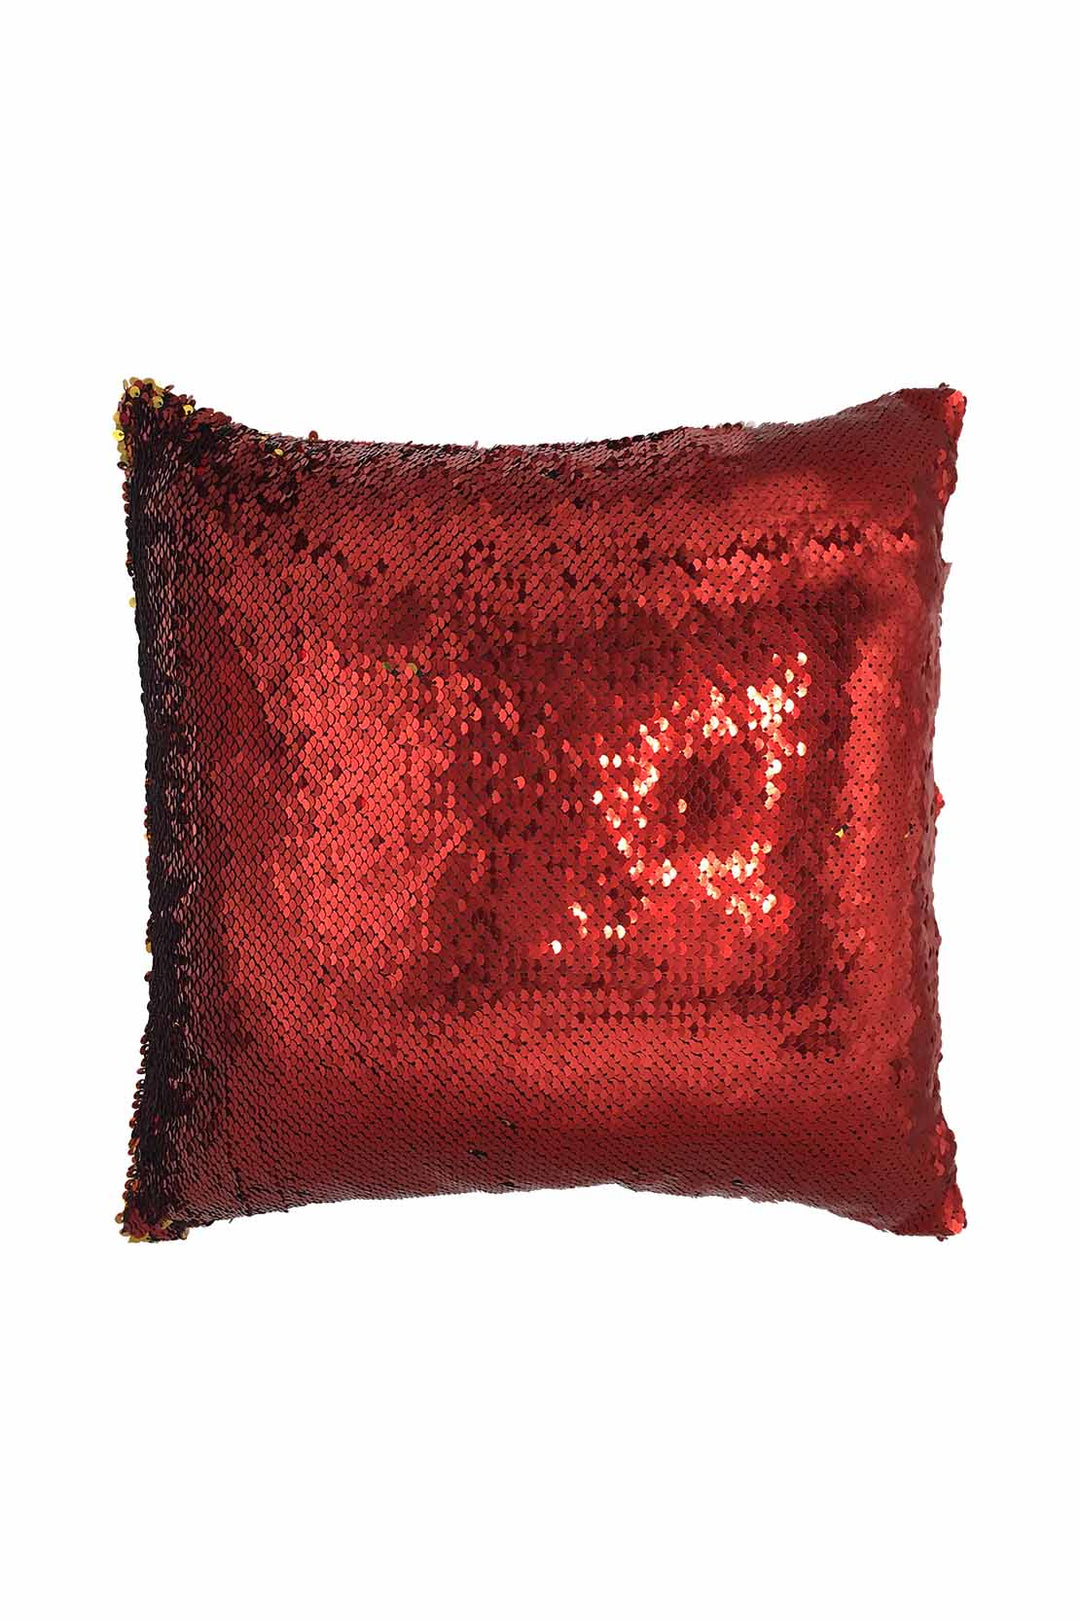 Glitter Cushion Cover Without Filling Red and Black - V Surfaces